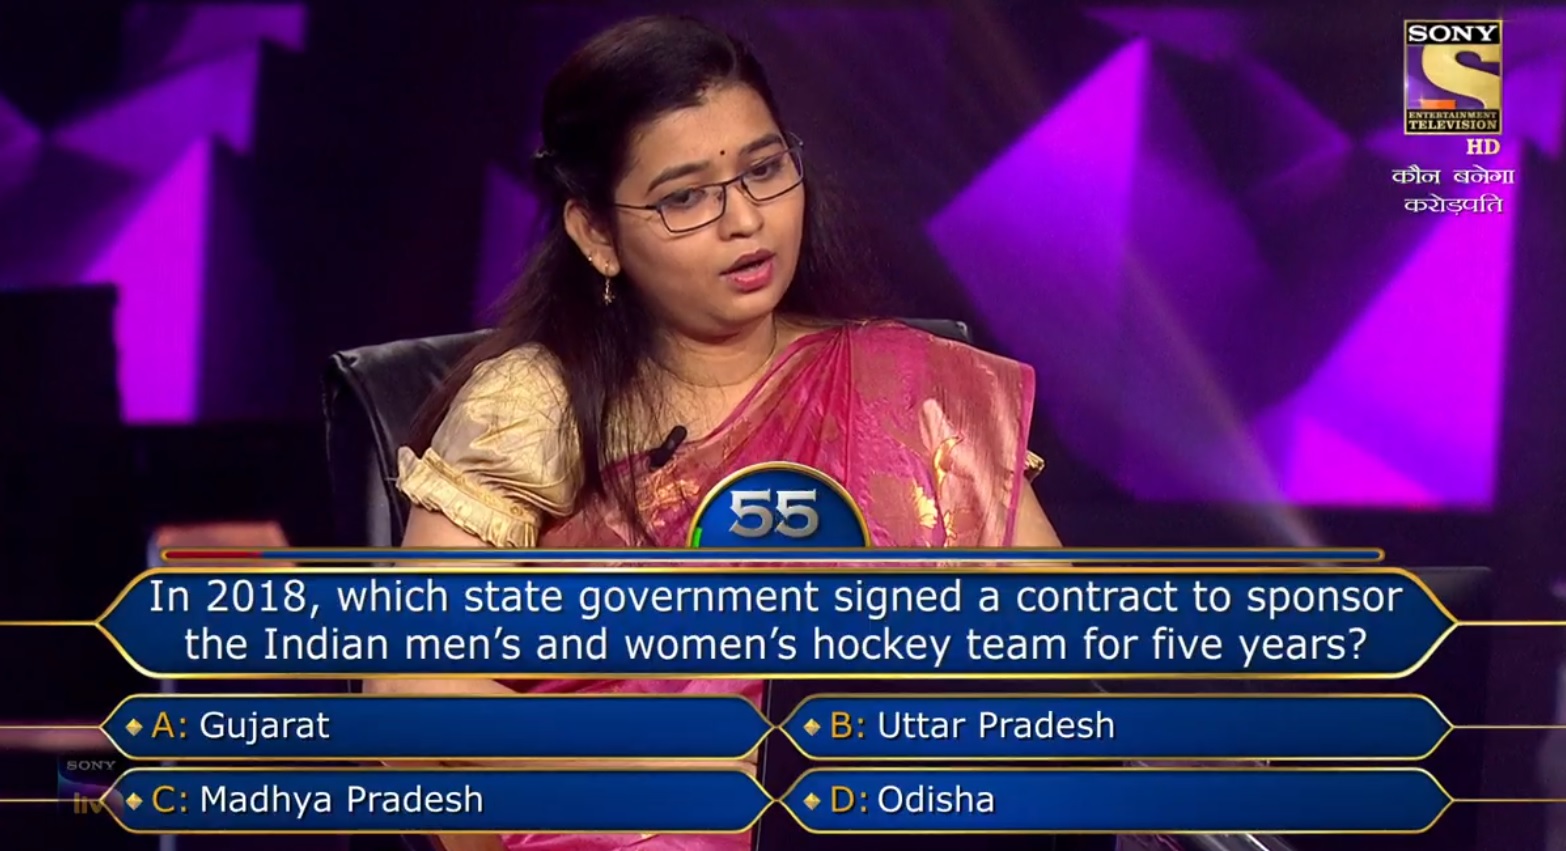 Ques : In 2018, which state government signed a contract to sponsor the Indian men’s and women’s hockey team for five years?